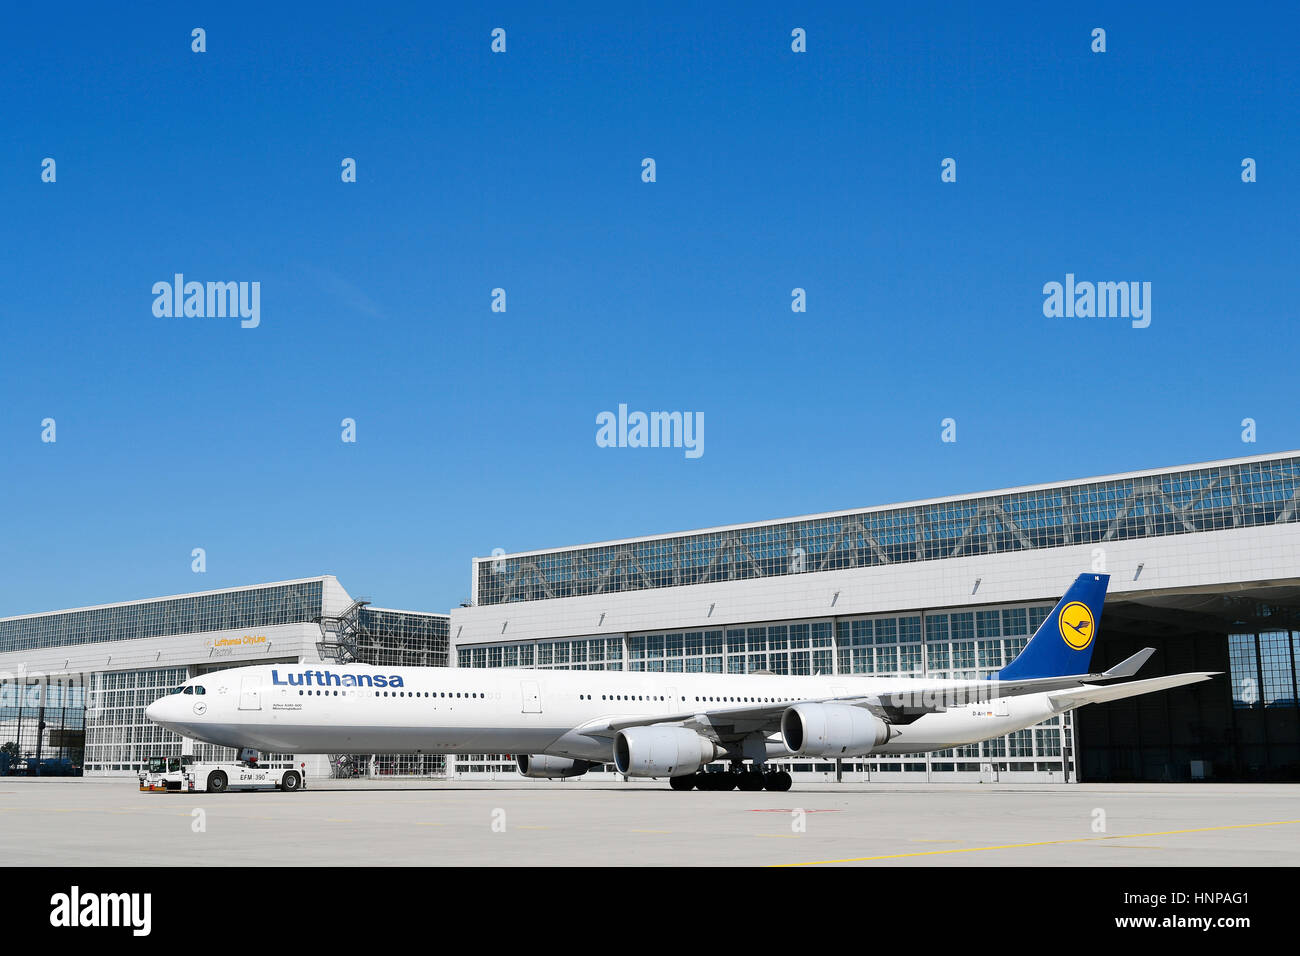 Lufthansa Airbus A340 with push-back truck in front of maintenance hangar, Hangar, Munich, Upper Bavaria, Germany Stock Photo